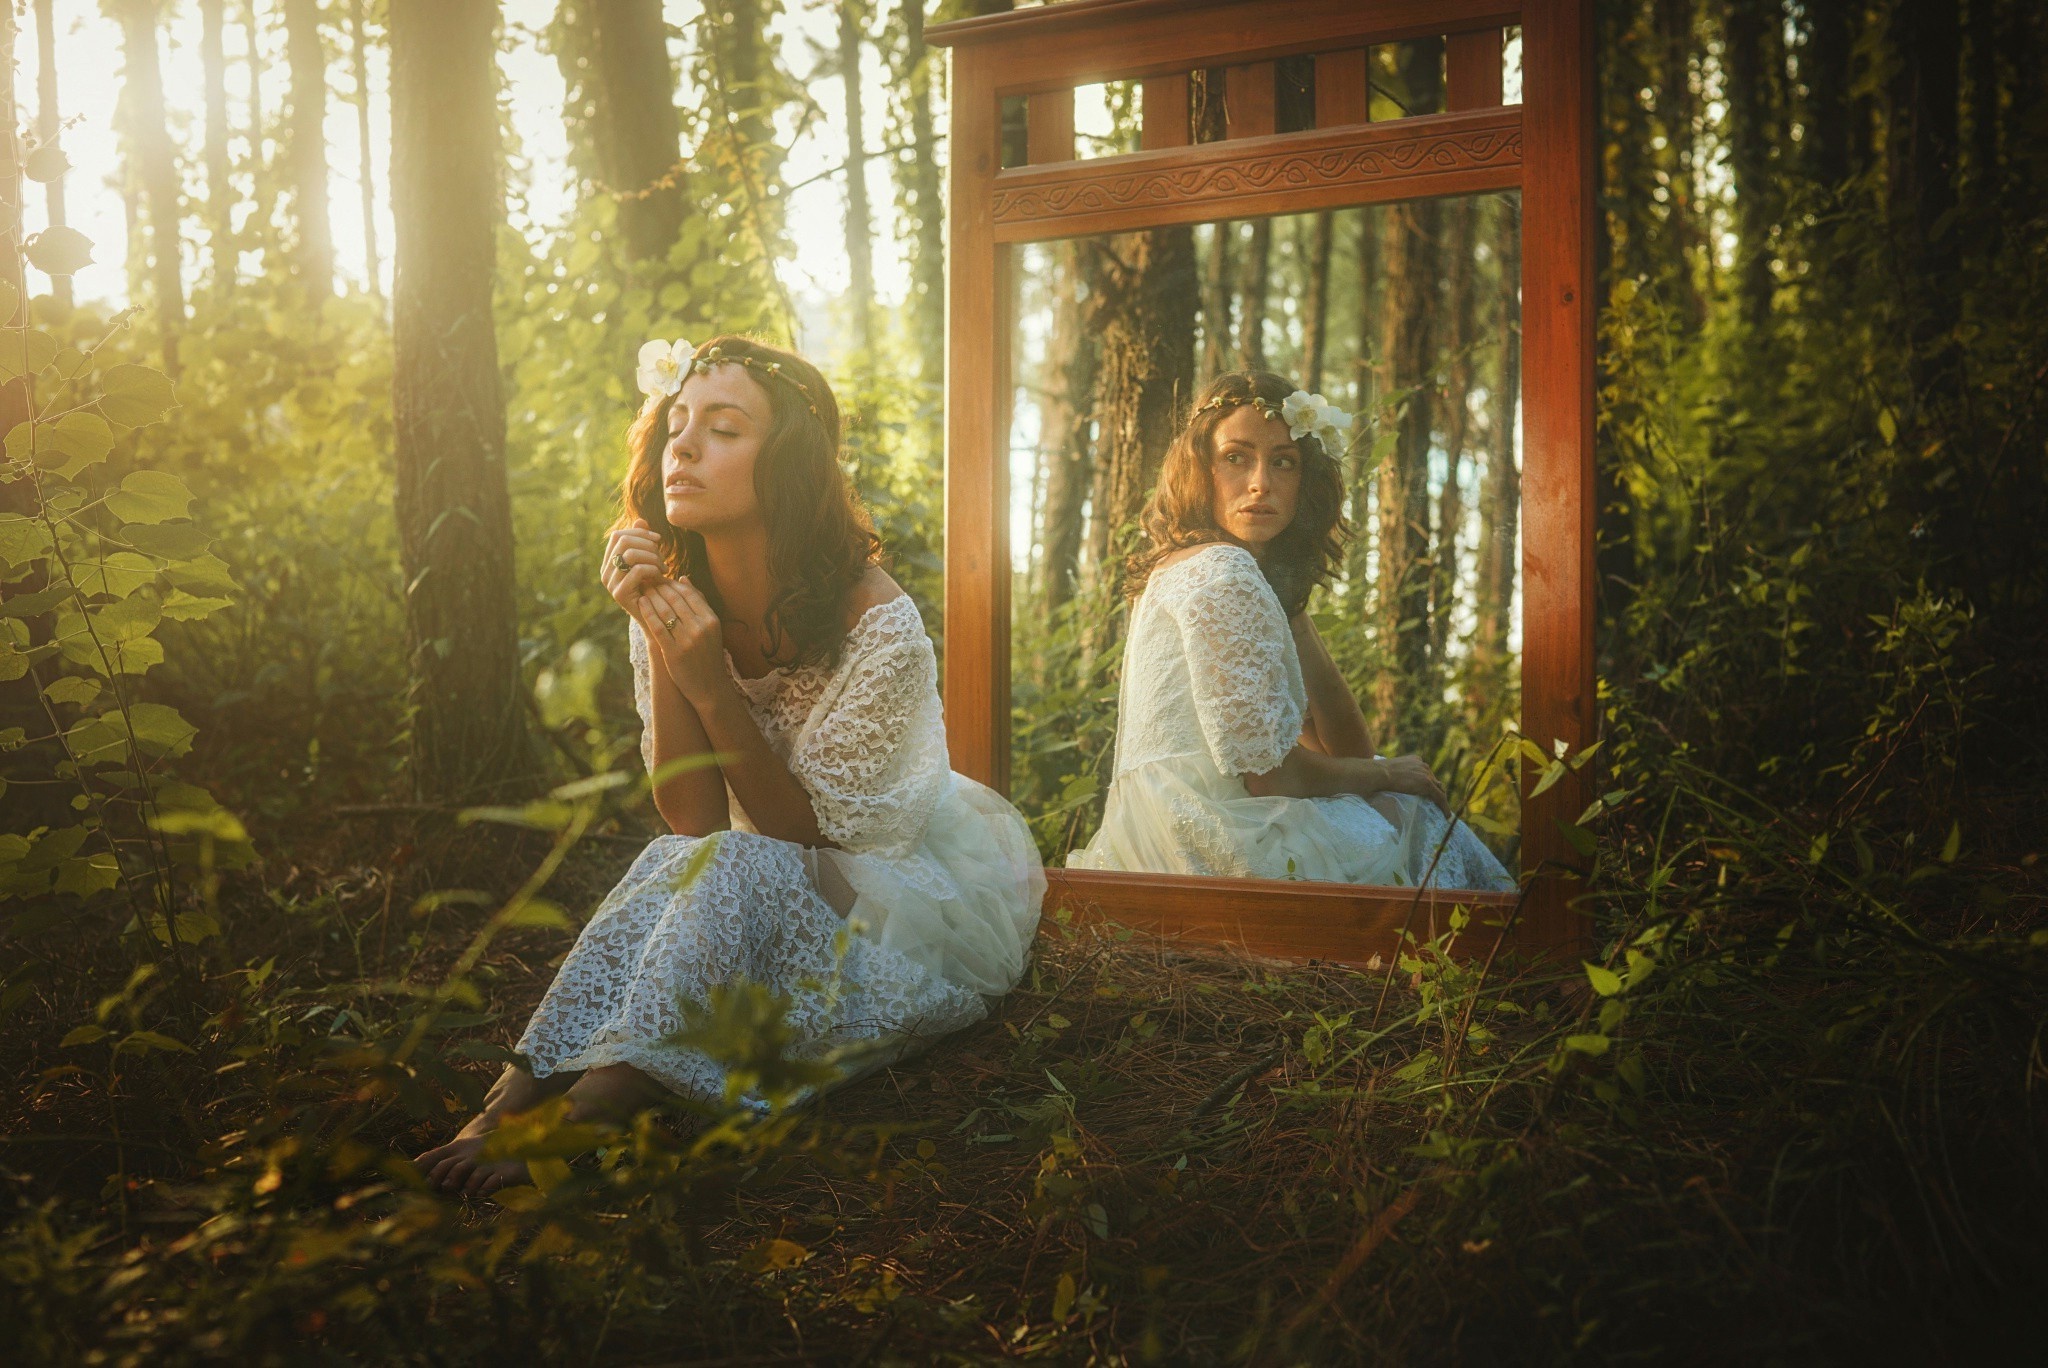 Mirror: Sunlight, Women in the reflection, Surreal, A reflecting surface mounted in a wooden frame. 2050x1370 HD Background.